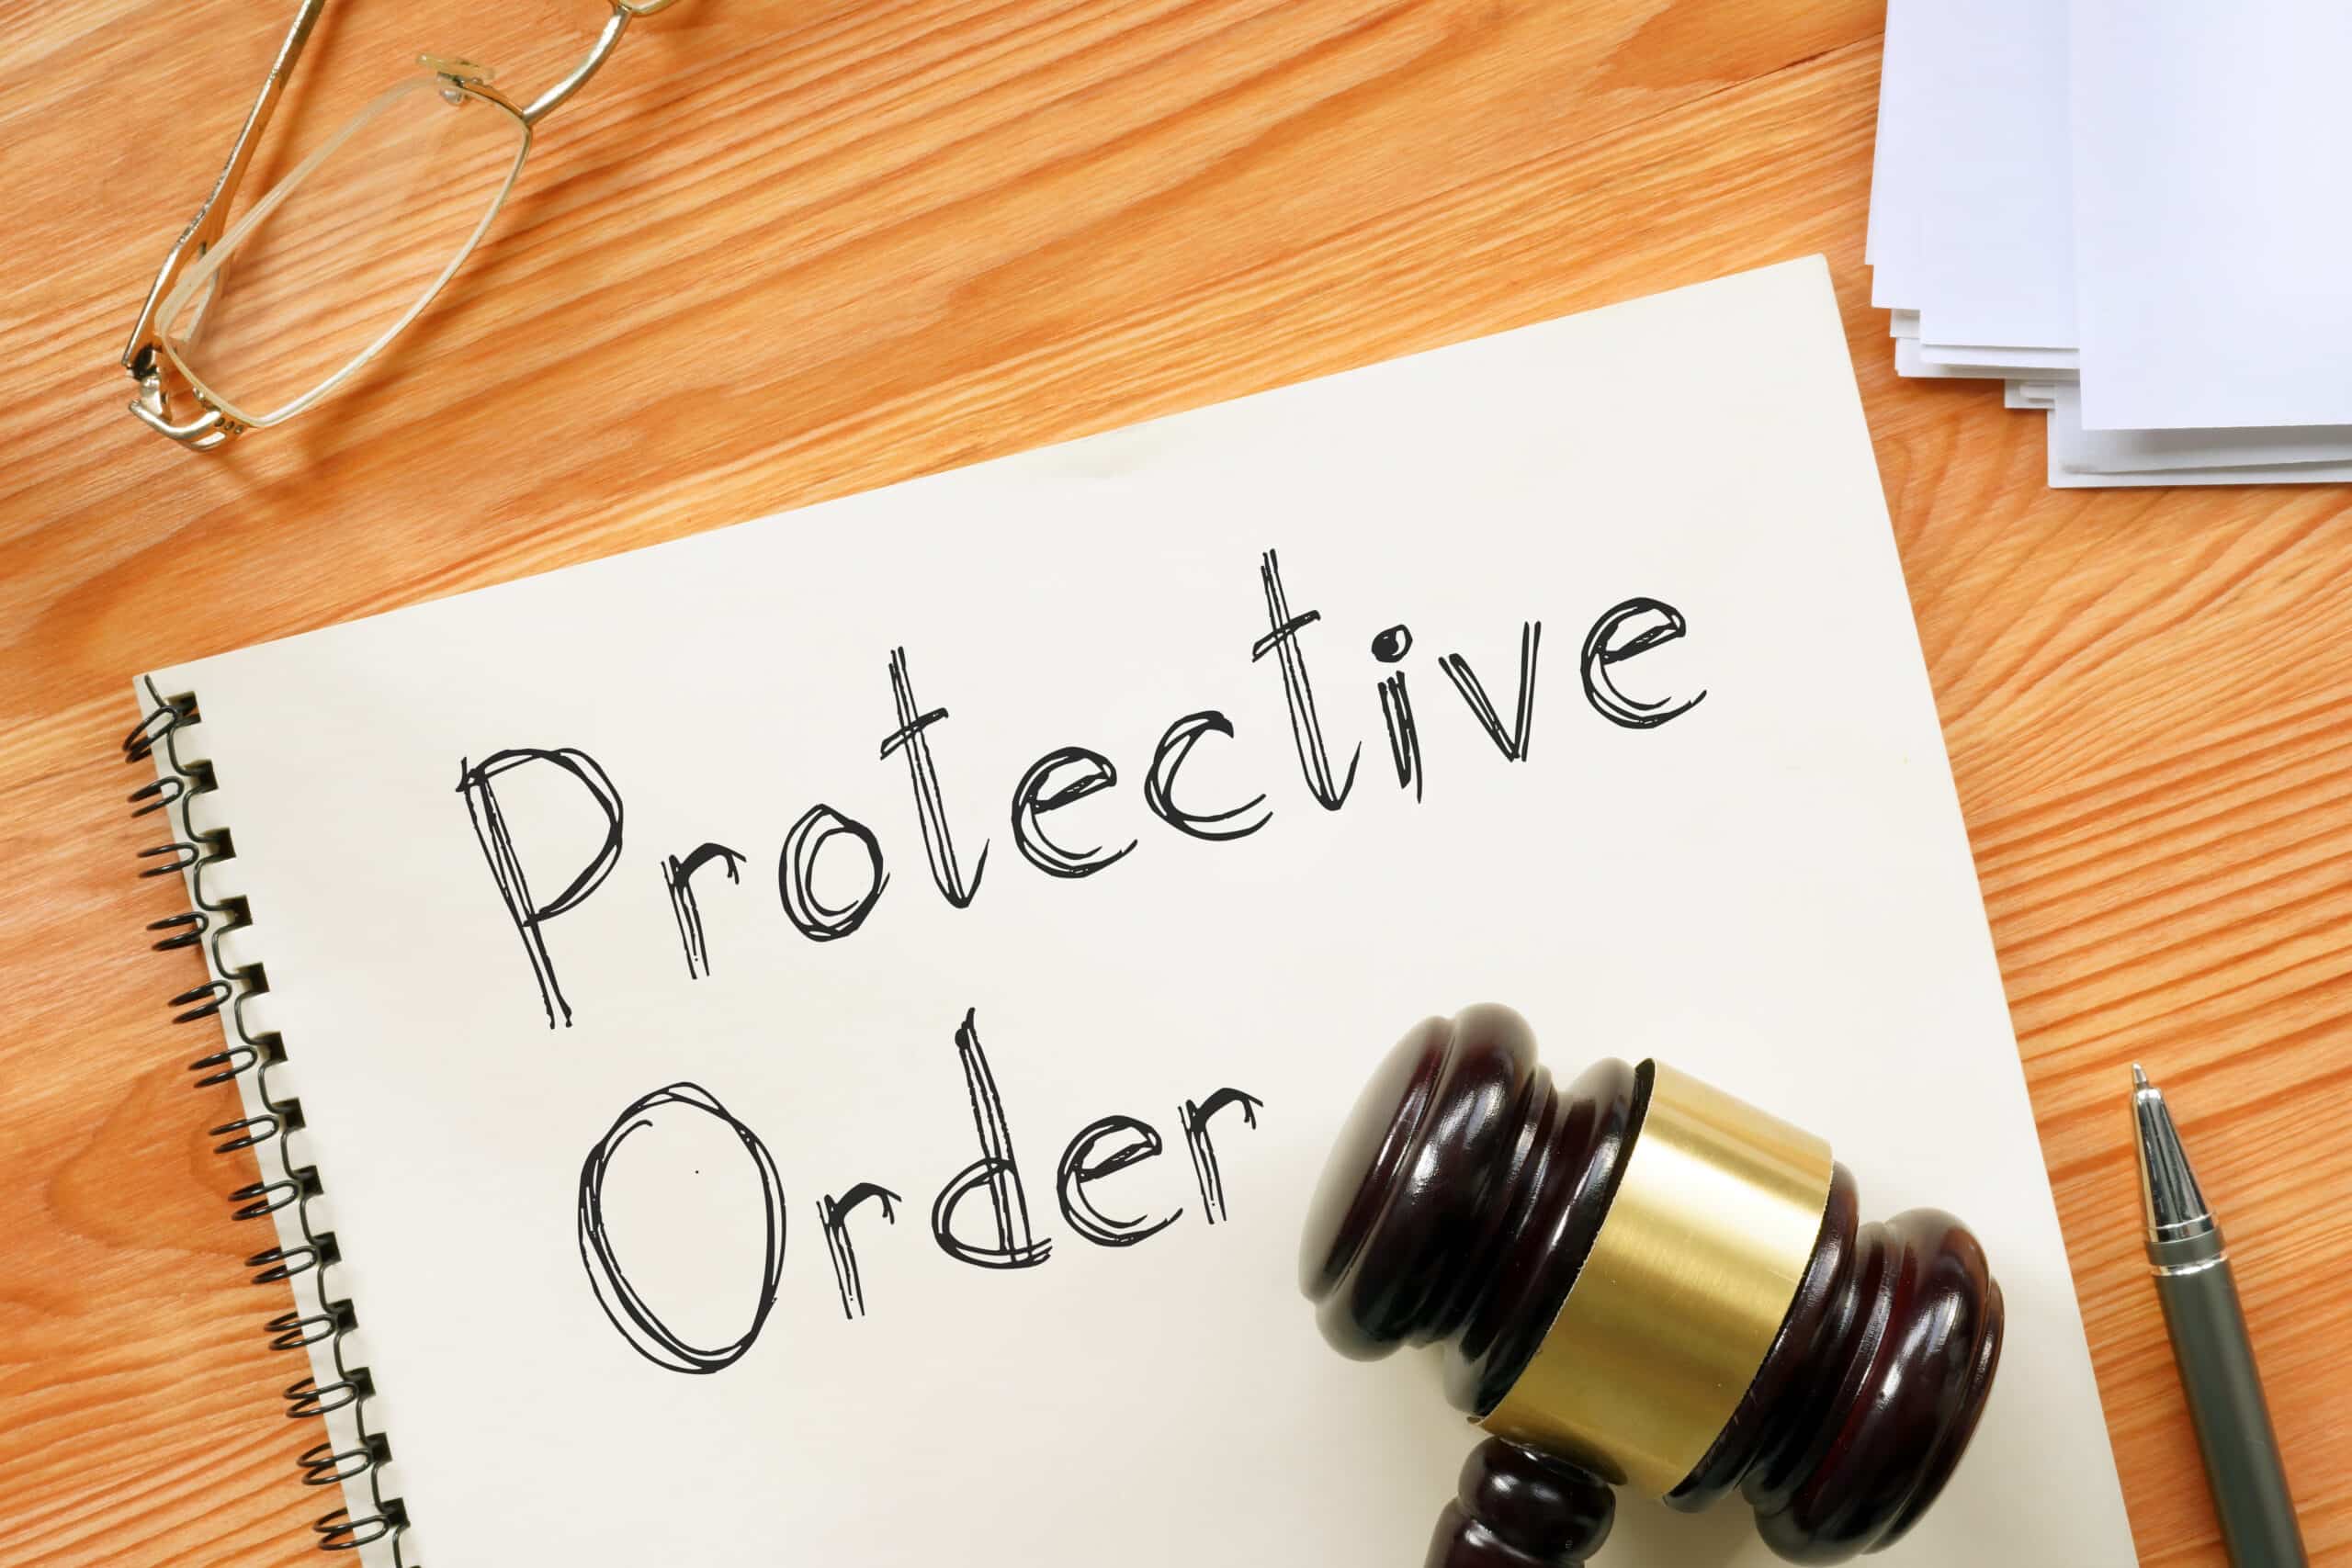 Proactive Legal Defense for Unjust Civil Protection Orders